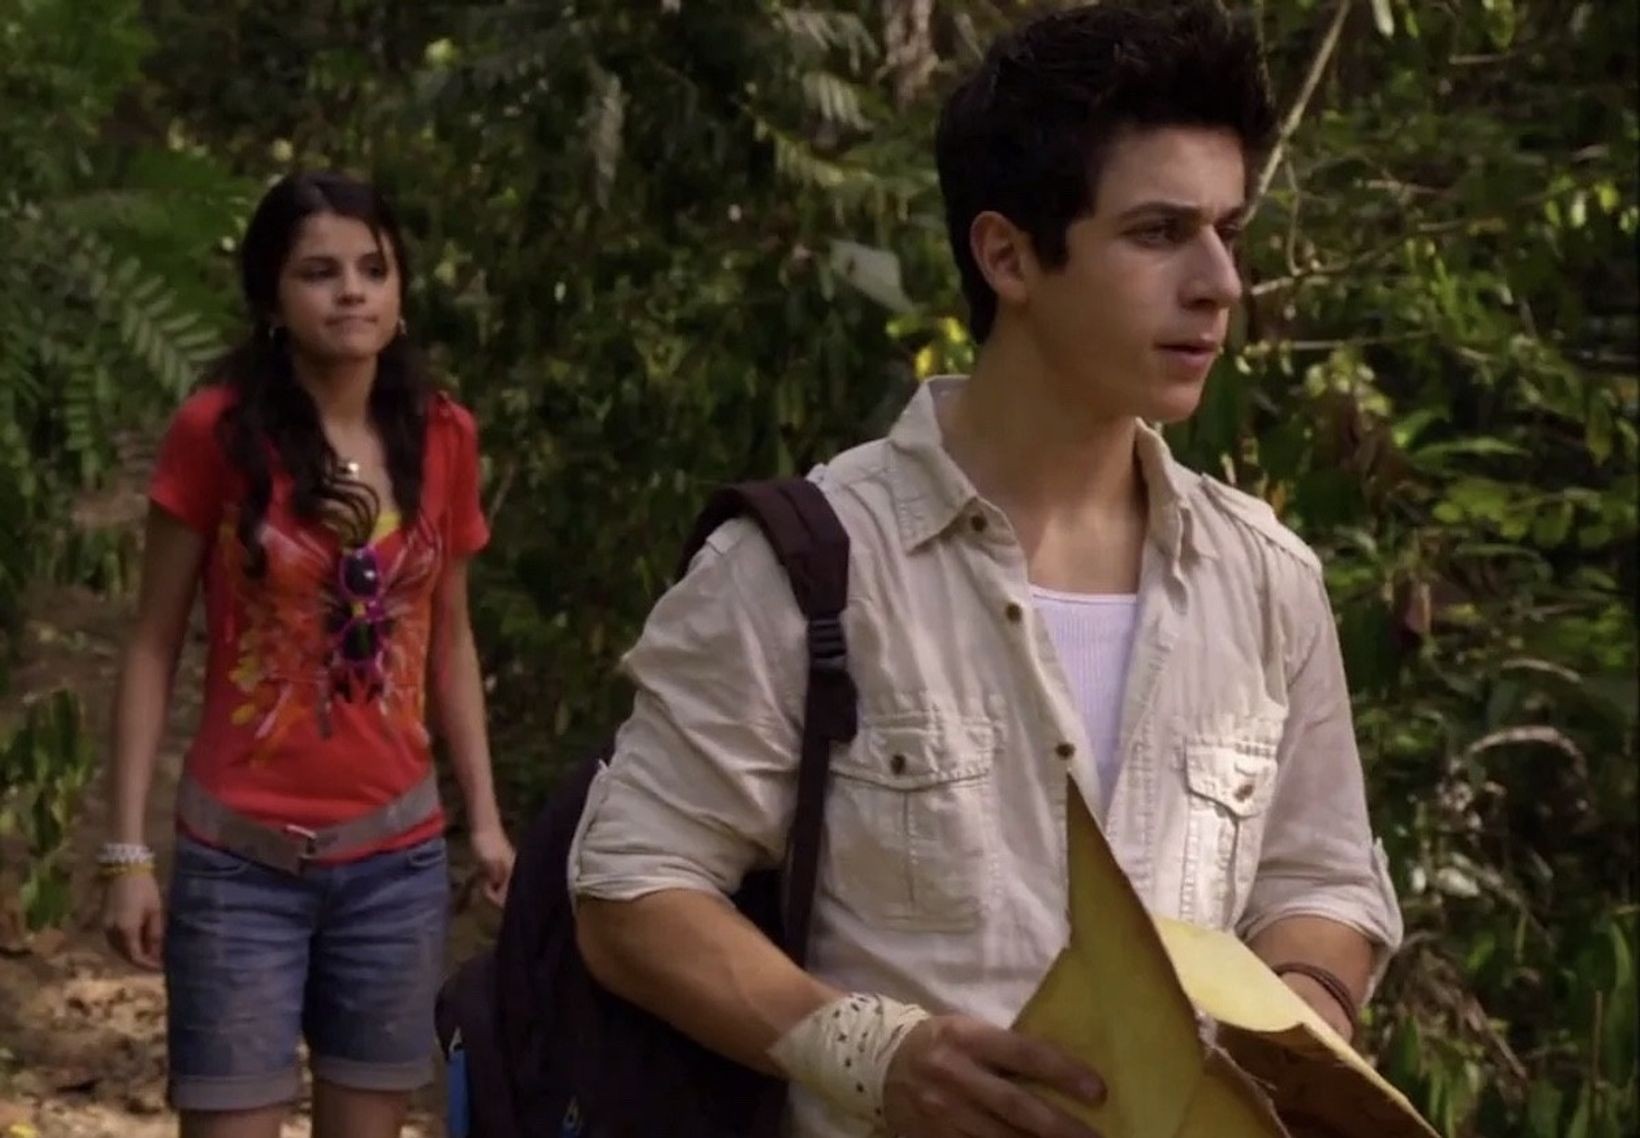 In the <em>Wizards of Waverly Place</em> revival, Justin is living a life without magic, until a young wizard named Billie tells him the future of the wizard world is at stake, and it's up to Justin to help her. <em>Wizards of Waverly Place is coming in 2024, and stars Selena Gomez, David Henrie, Janice LeAnn Brown, Mimi Gianopulos, and Alkaio Thiele.</em>